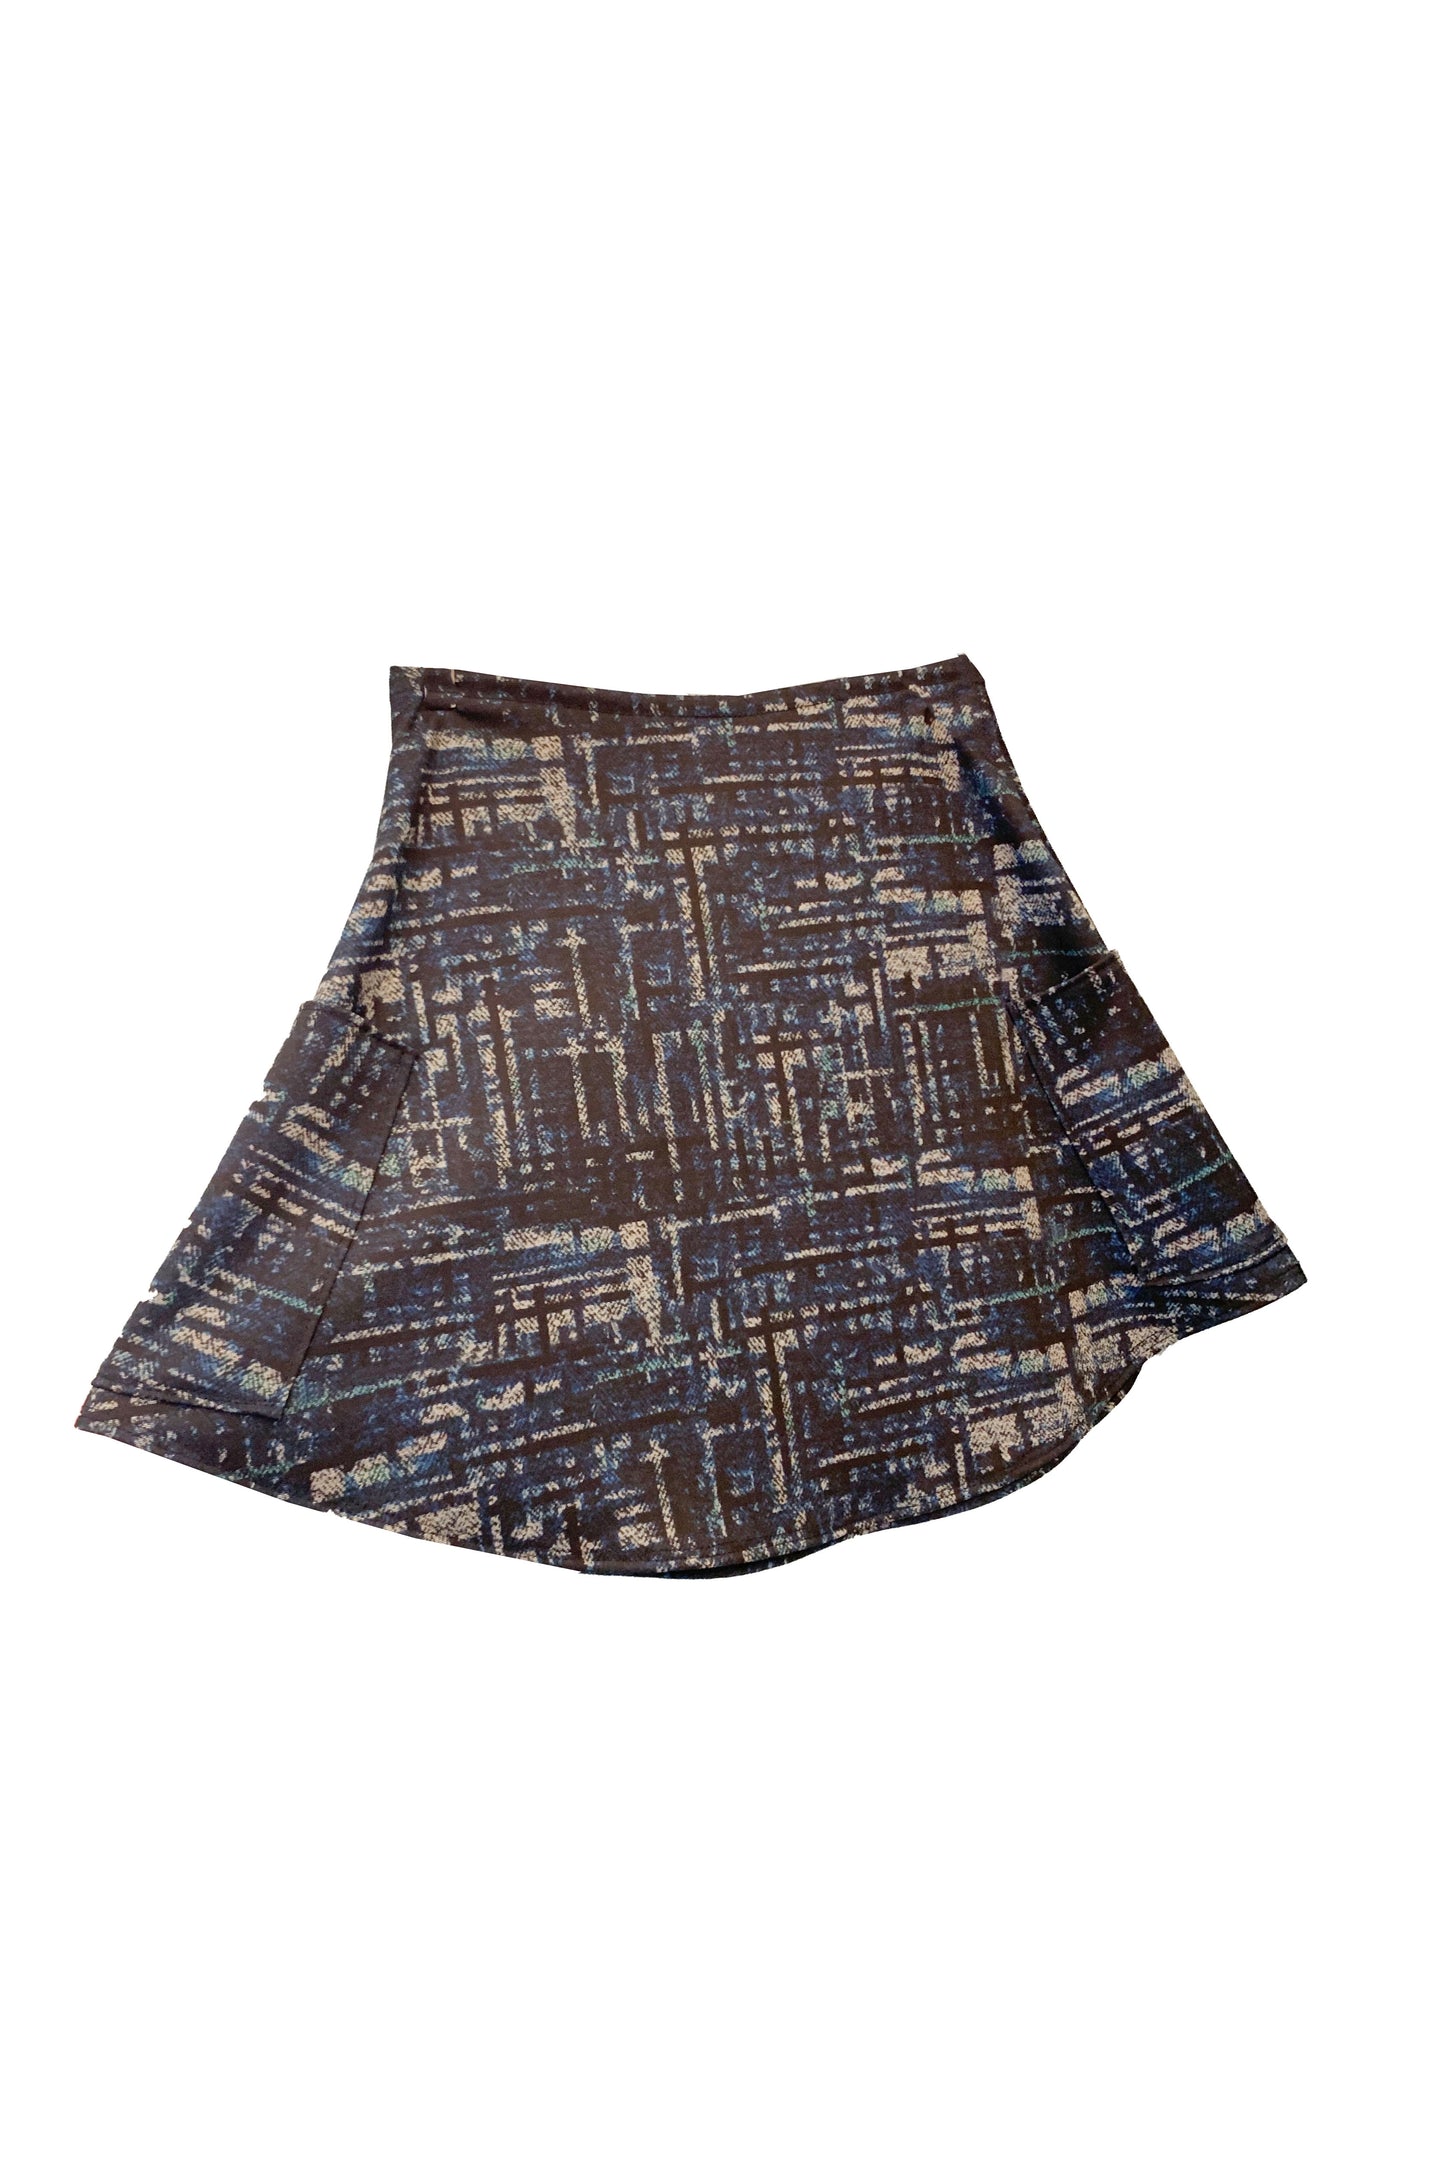 Short Two-Pocket Skirt (2024) by SI Design, Blue hatch pattern, A-line, elastic waist, above the knee, two pouch pockets, sizes S-L, made in Quebec